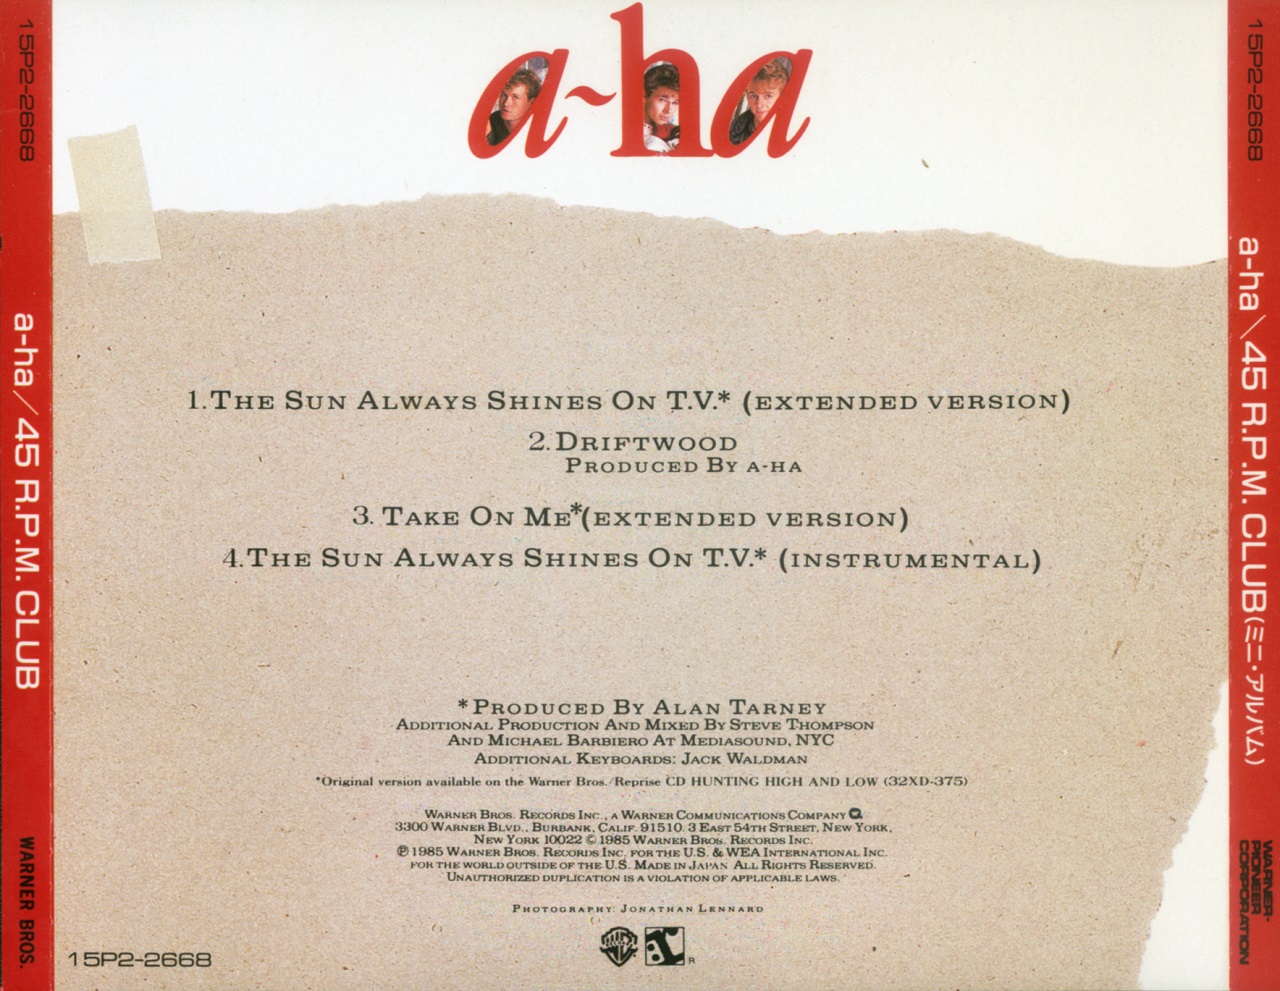 A-ha - 45 r.p.m. Club. A-ha - 1985 - 45 r.p.m. Club. Always the Sun текст. The Sun always Shines on t.v. a-ha.